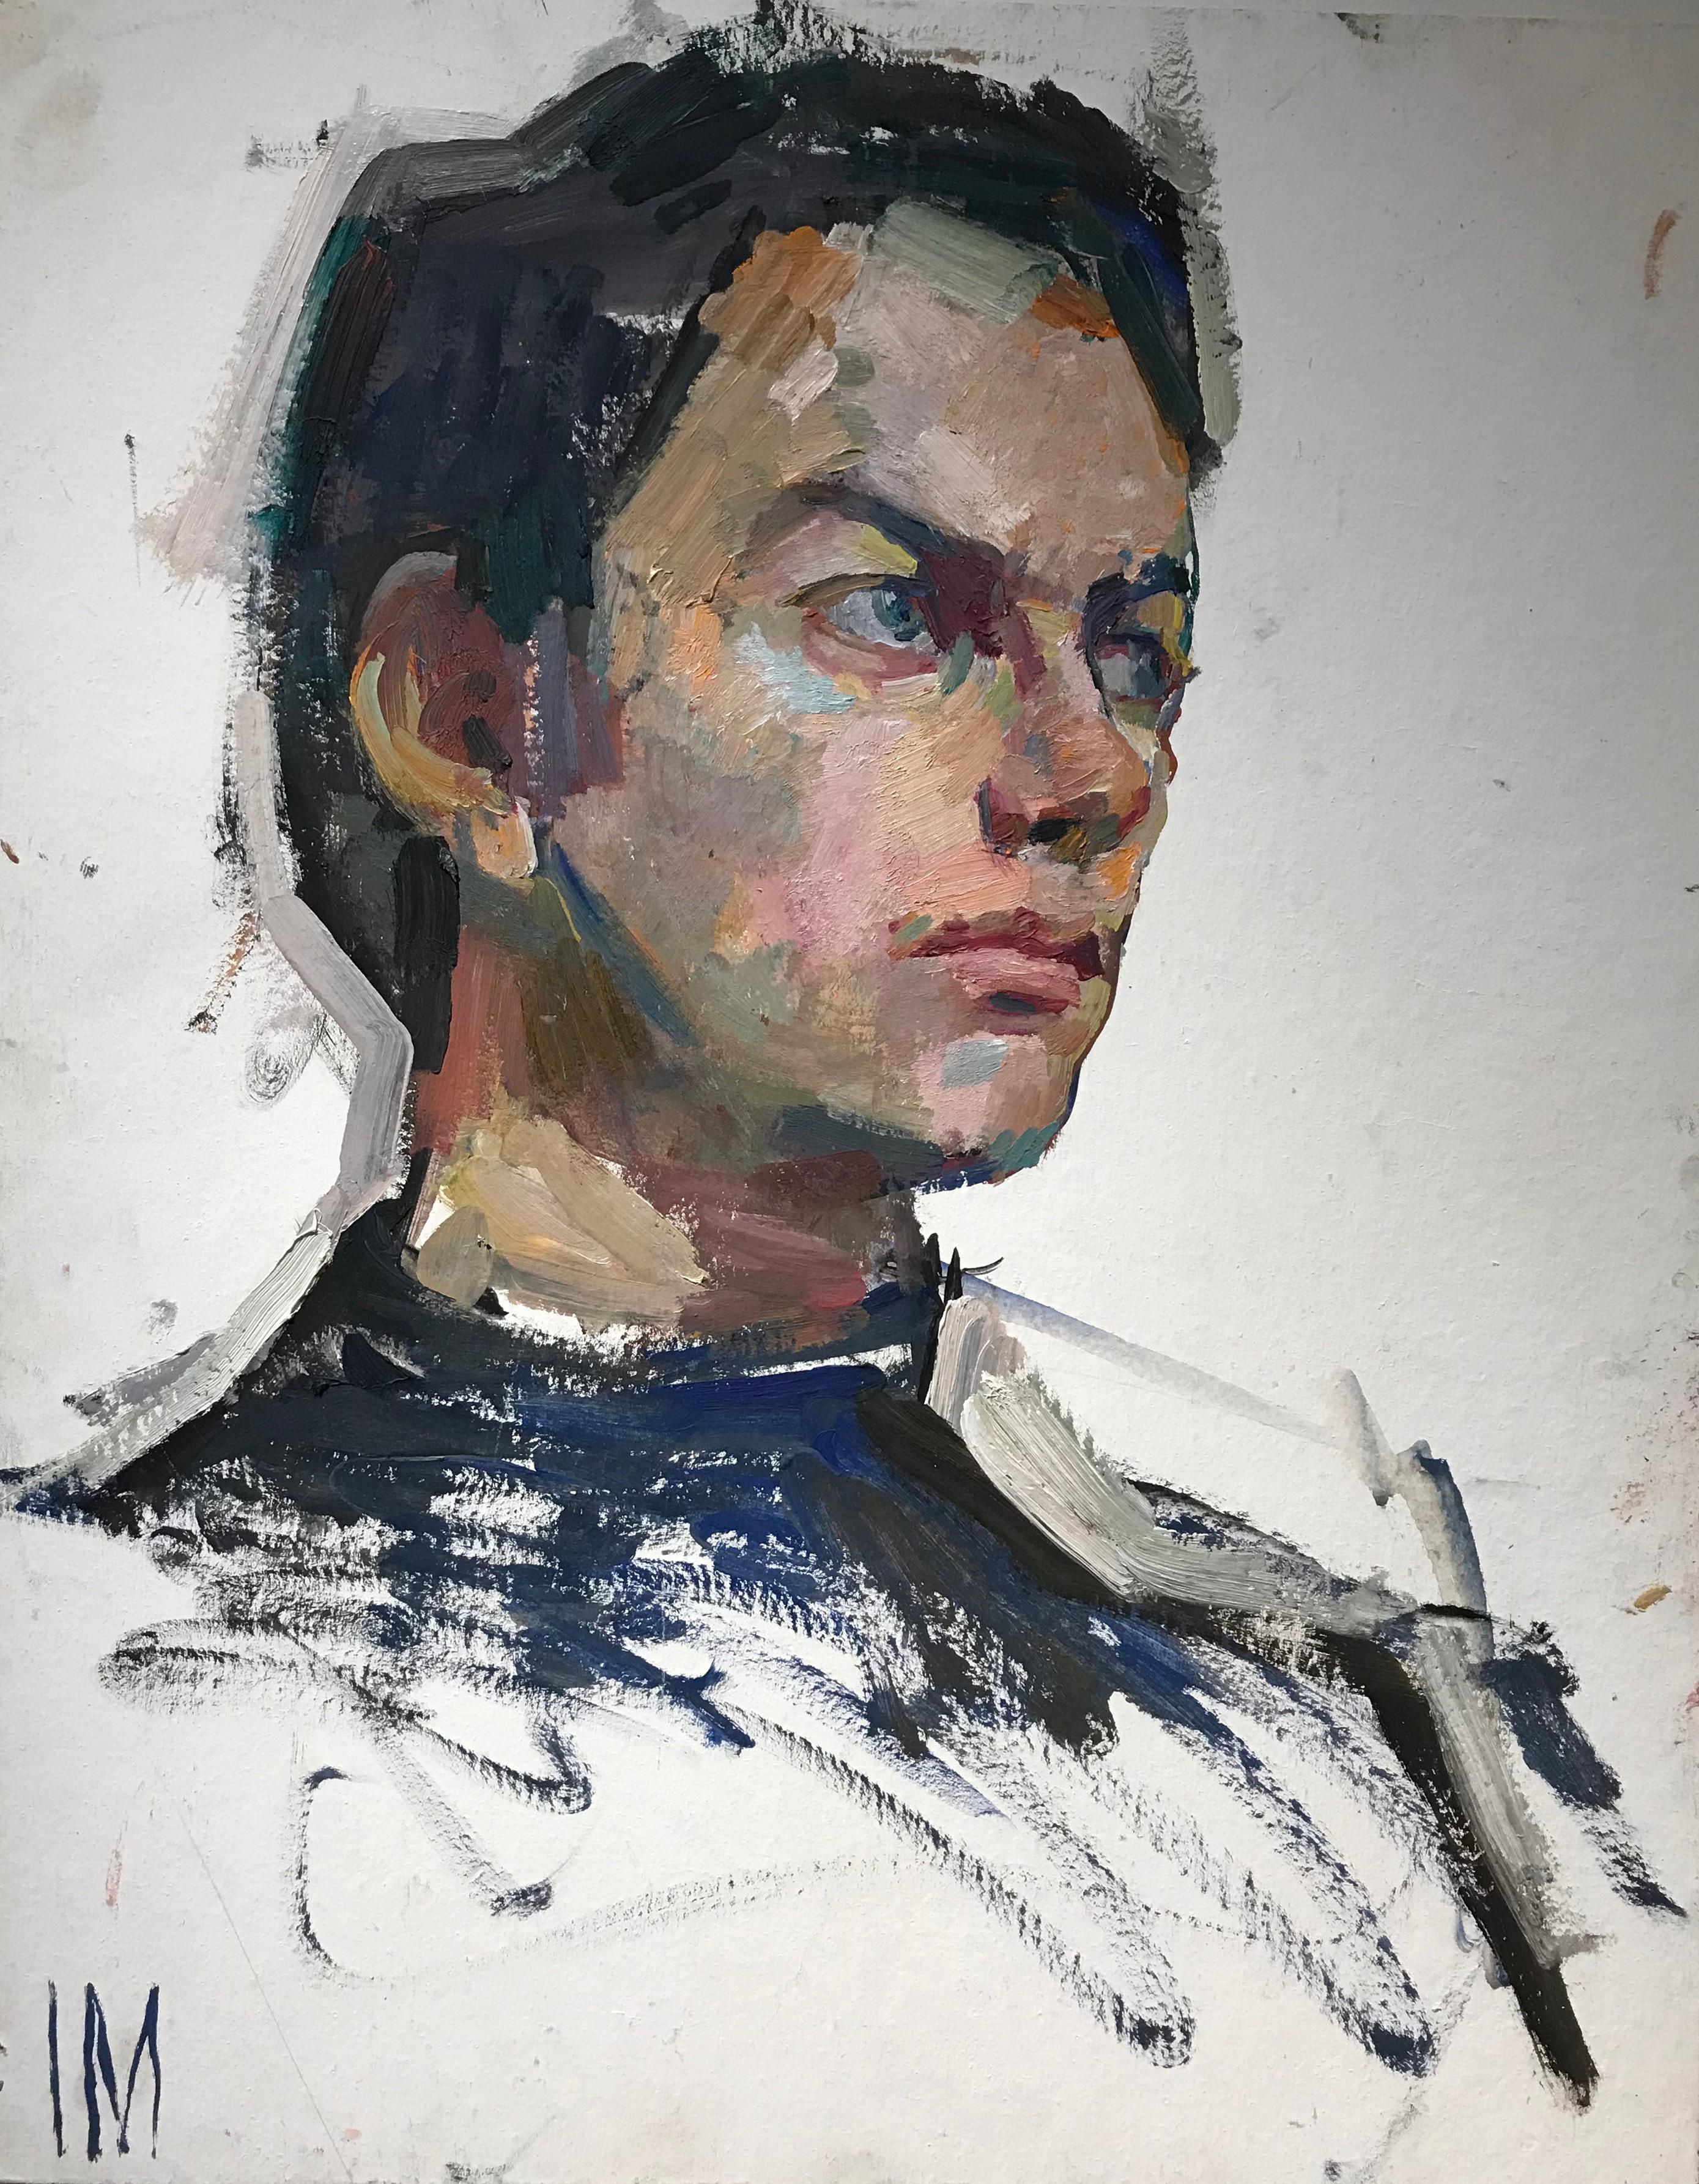 Portrait study from life, Oil on board by Iliya Mirochnik.

ILIYA MIROCHNIK- ARTIST BIO:
Originally from Odessa, Ukraine, Iliya immigrated to the United States in the early 1990's with his family. From a young age Iliya pursued training in the arts